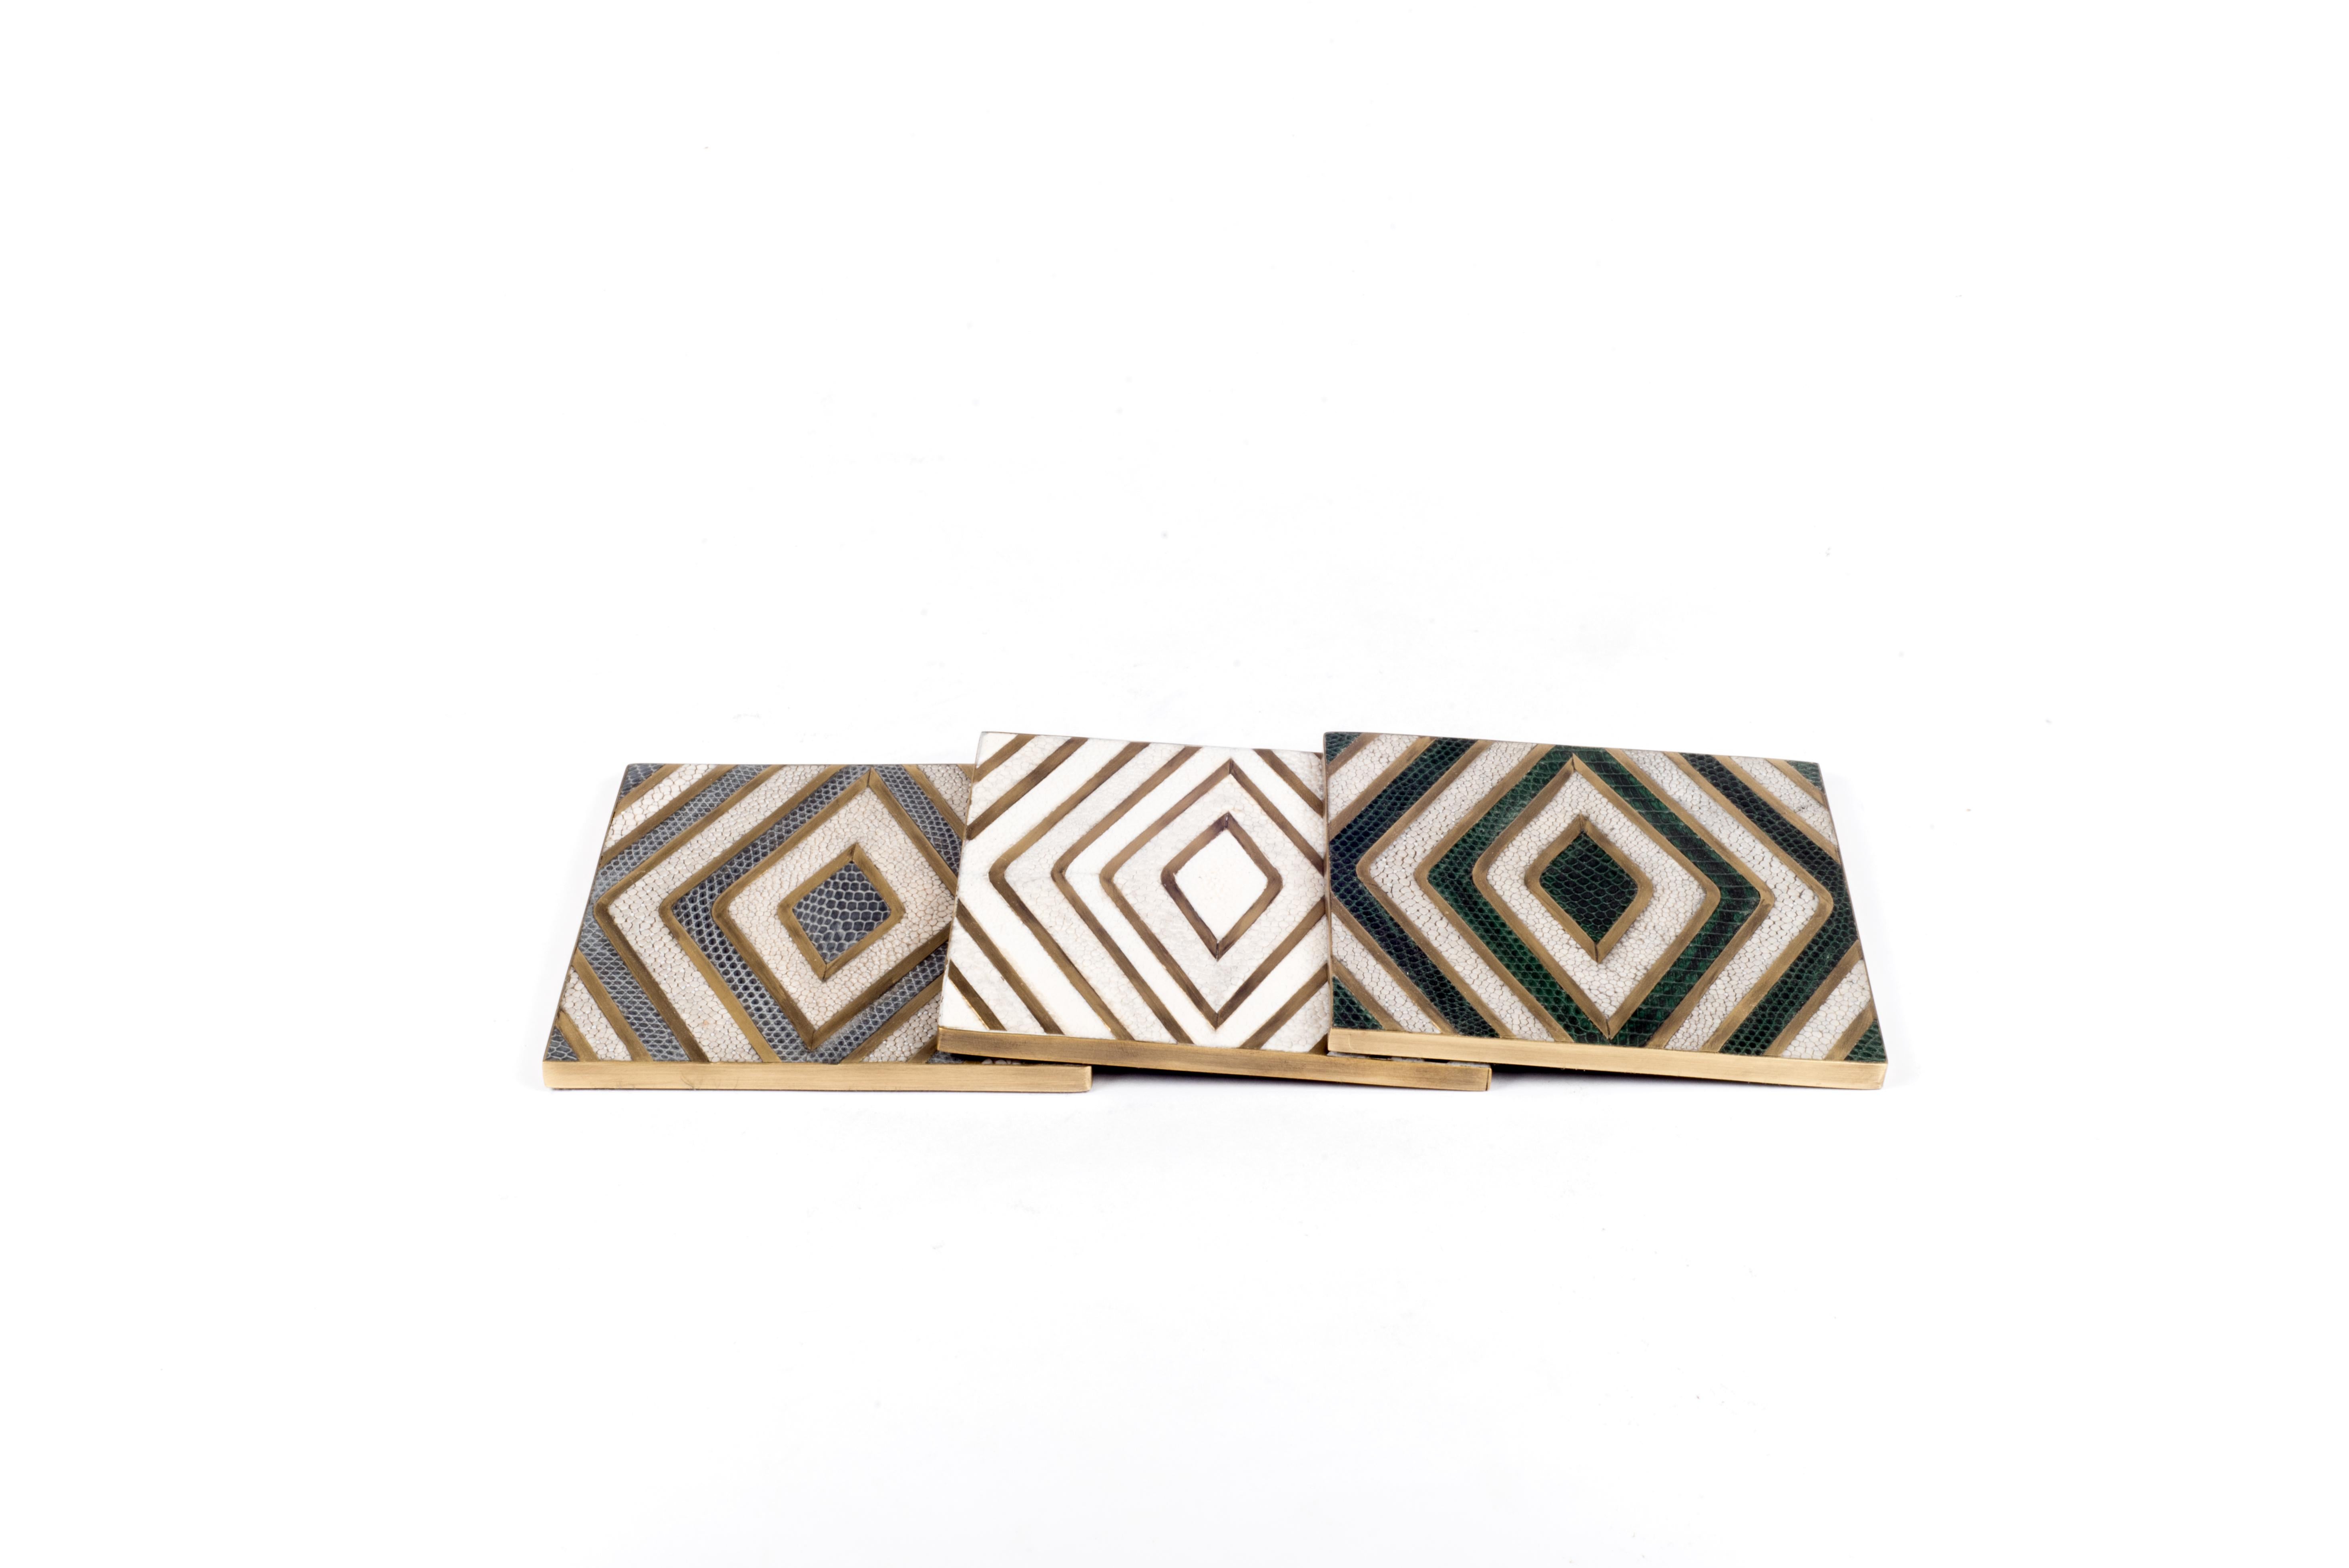 Inlay Set of 4 Geometric Coasters Inlaid in Shagreen, Shell and Brass by Kifu, Paris For Sale